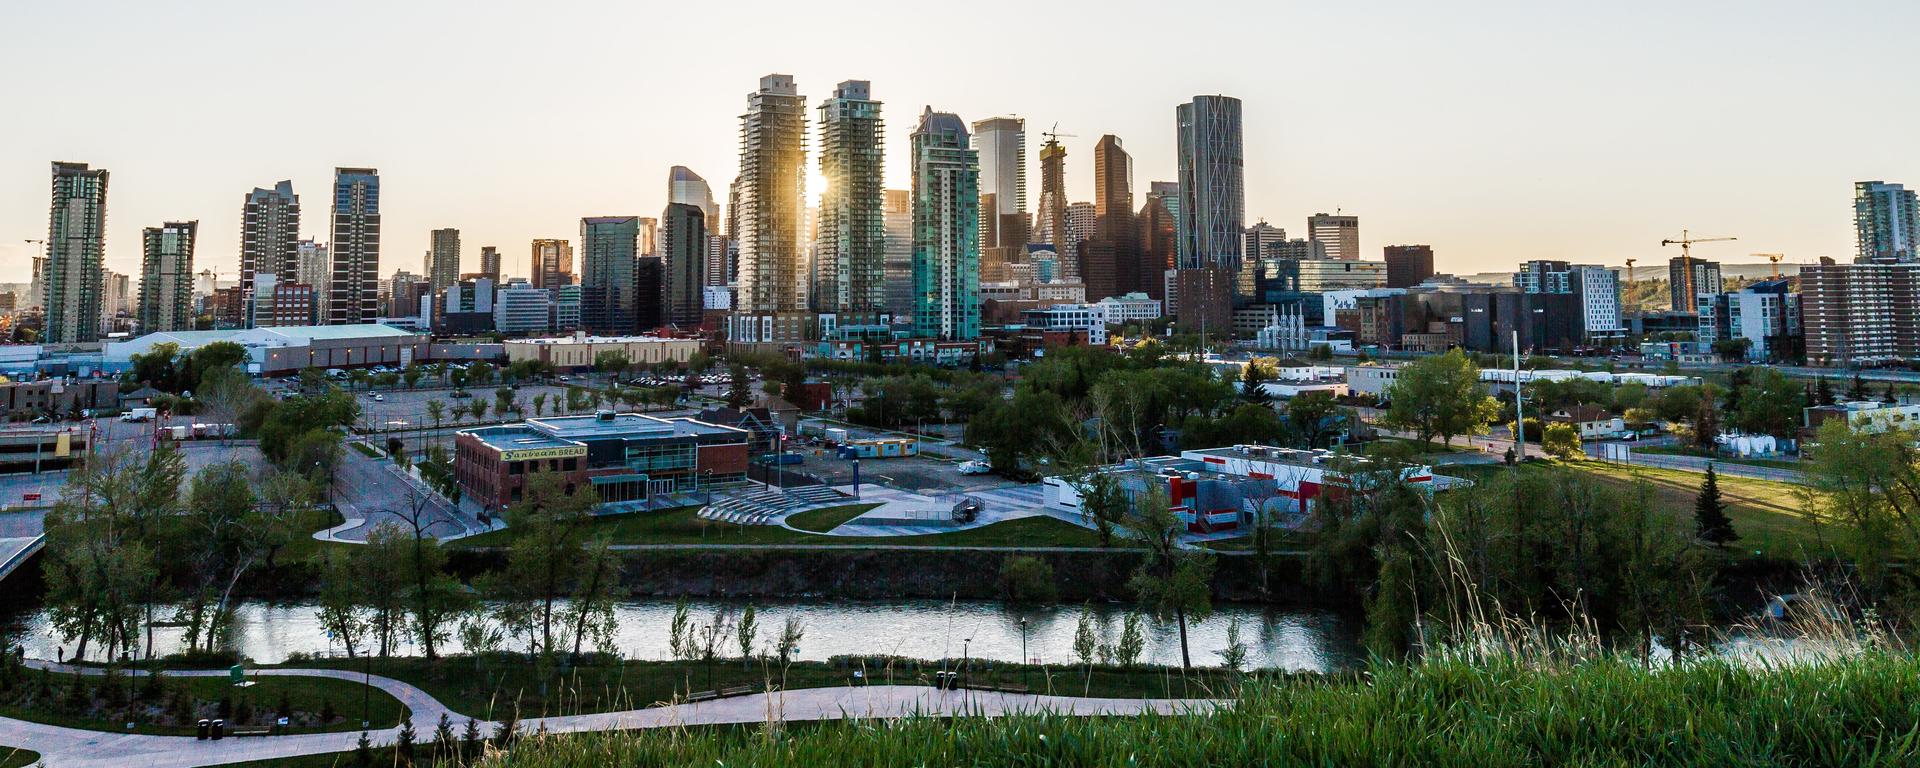 A view of downtown Calgary from the north side of the Bow River